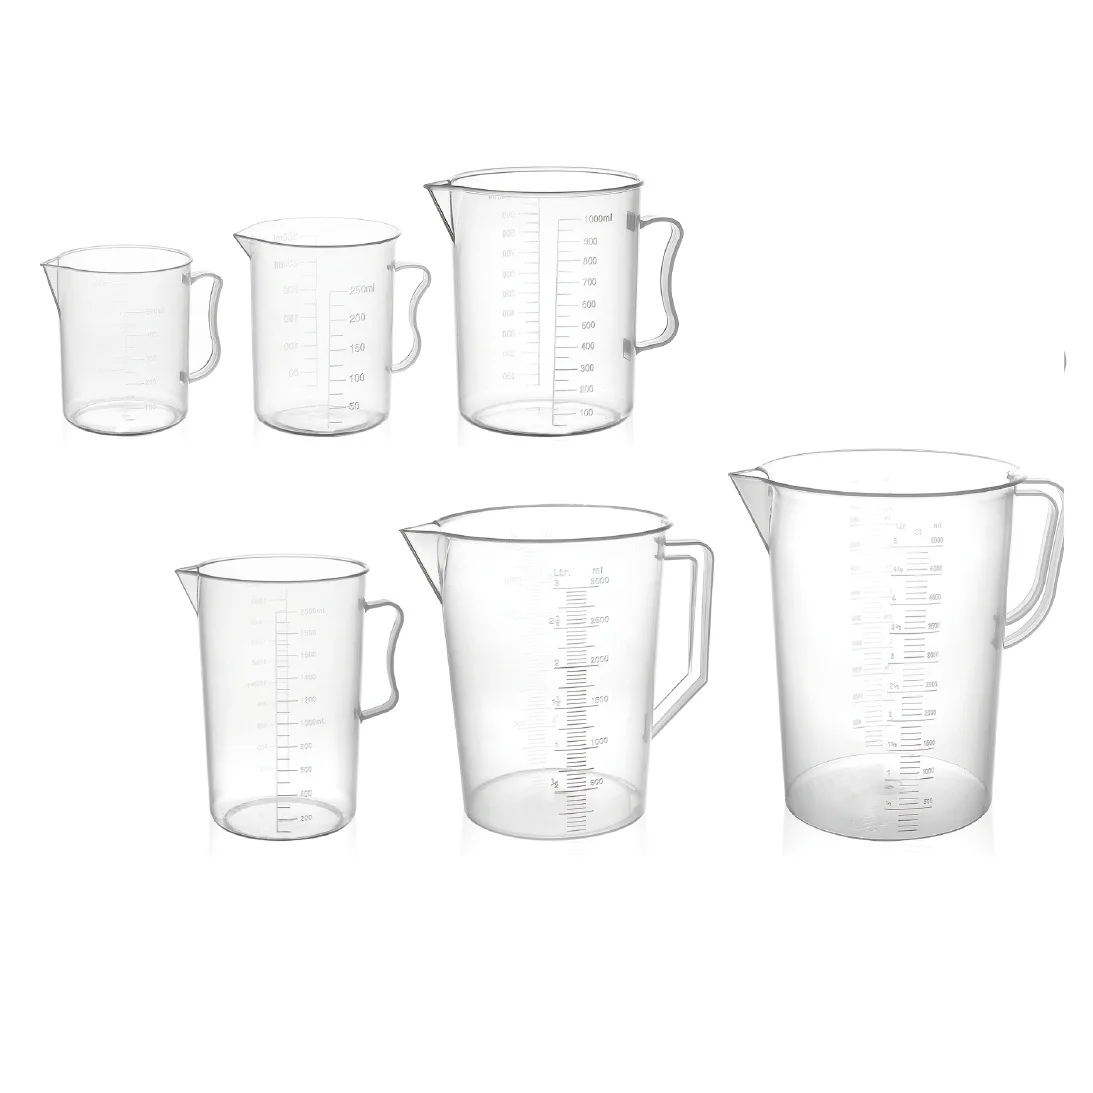 nl525 chemical plastic measuring cup